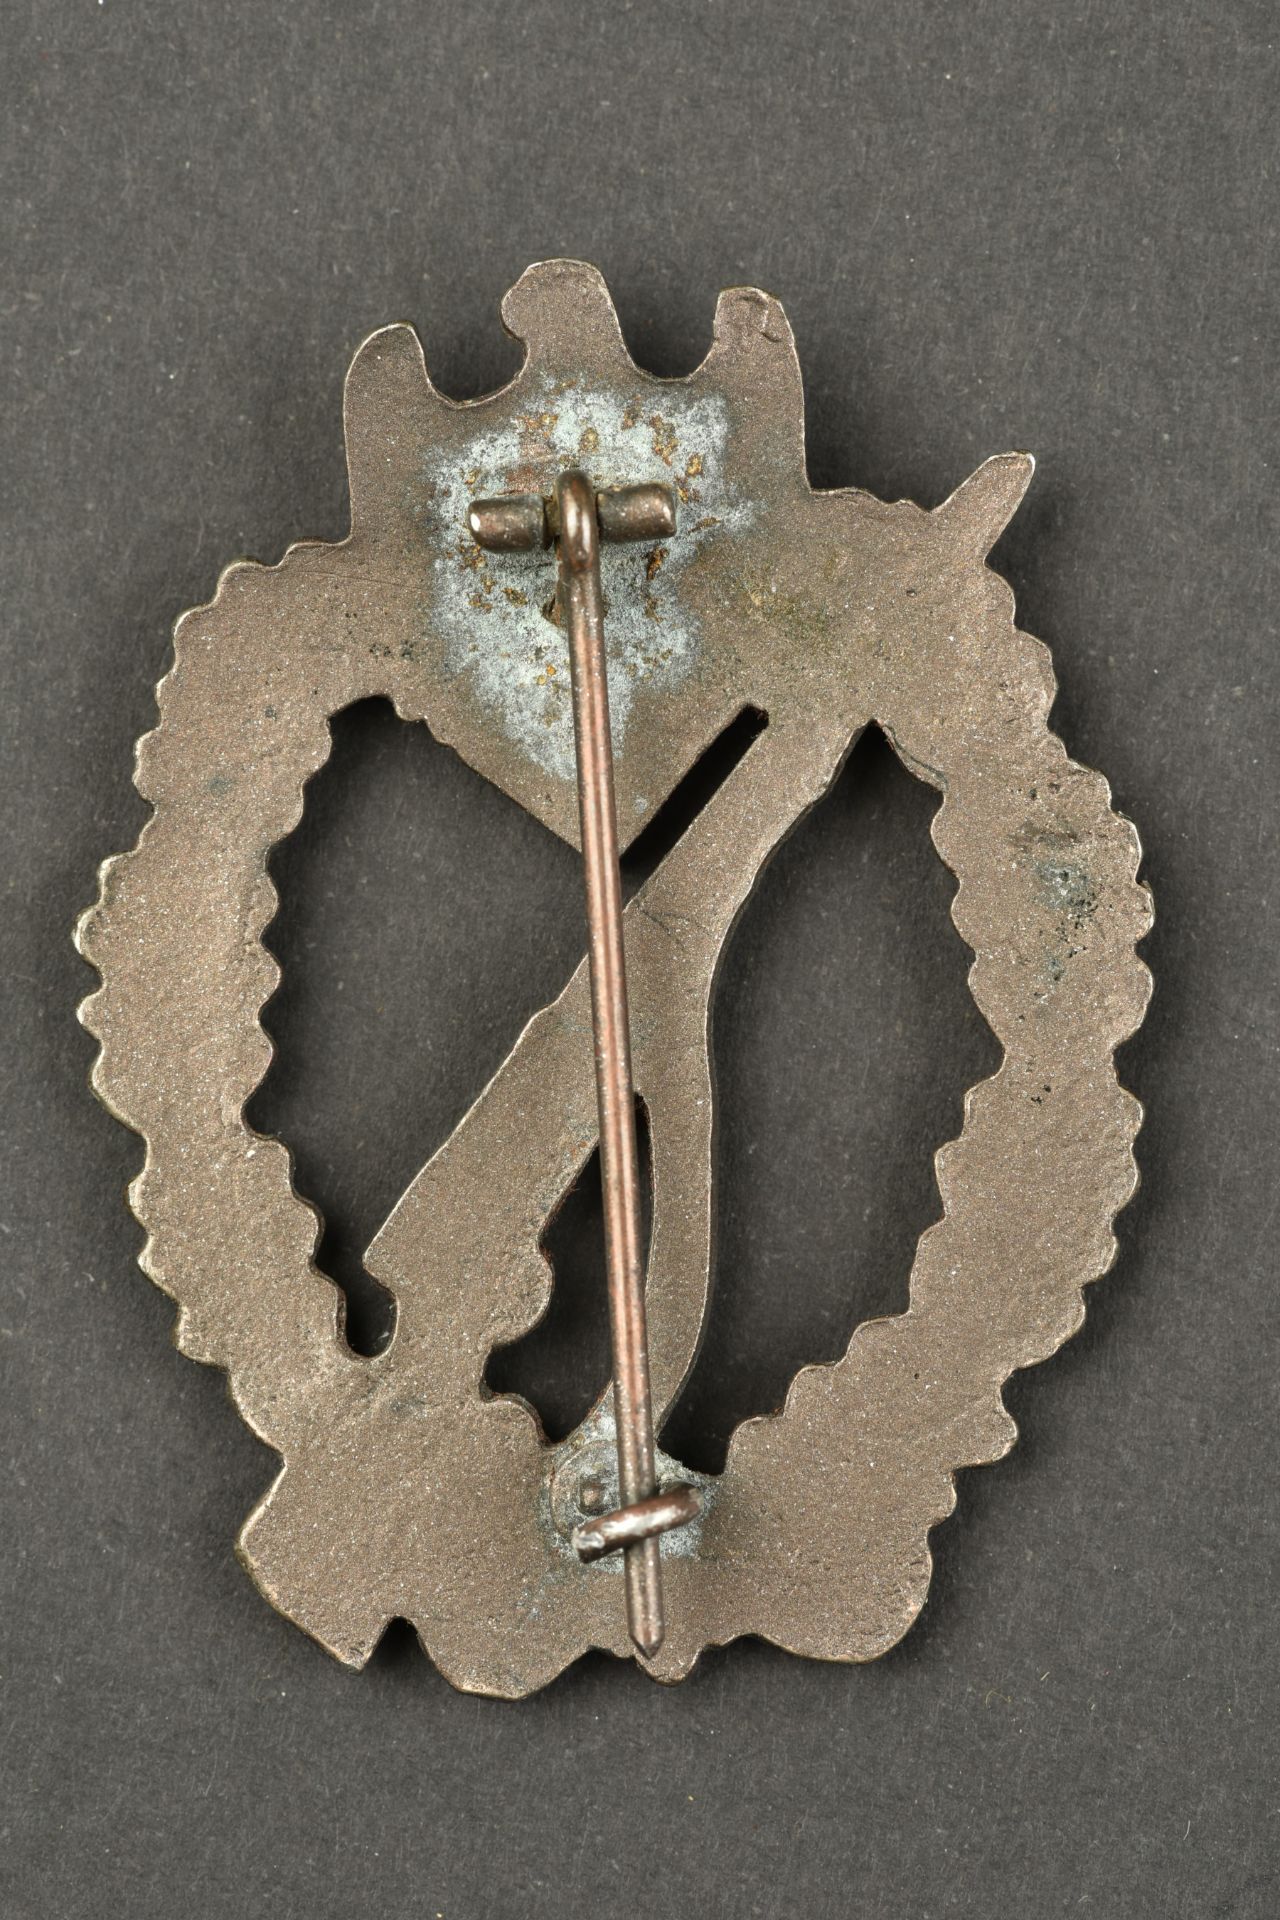 Infanterie Abzeichen. Infantry Badge. - Image 2 of 2